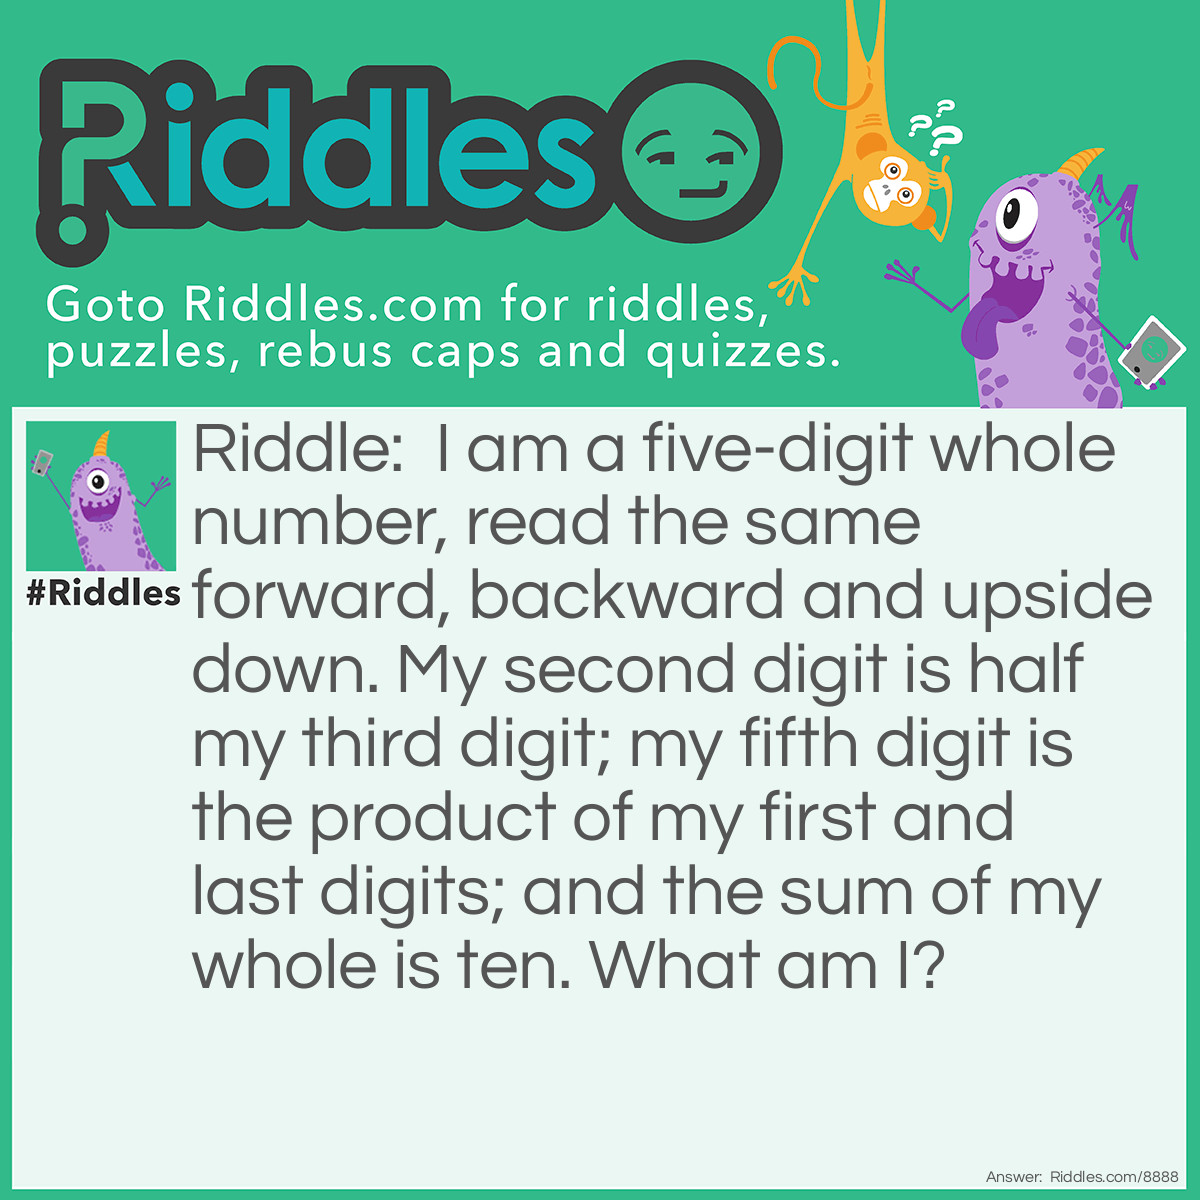 Riddle: I am a five-digit whole number, read the same forward, backward and upside down. My second digit is half my third digit; my fifth digit is the product of my first and last digits; and the sum of my whole is ten. What am I? Answer: 10801